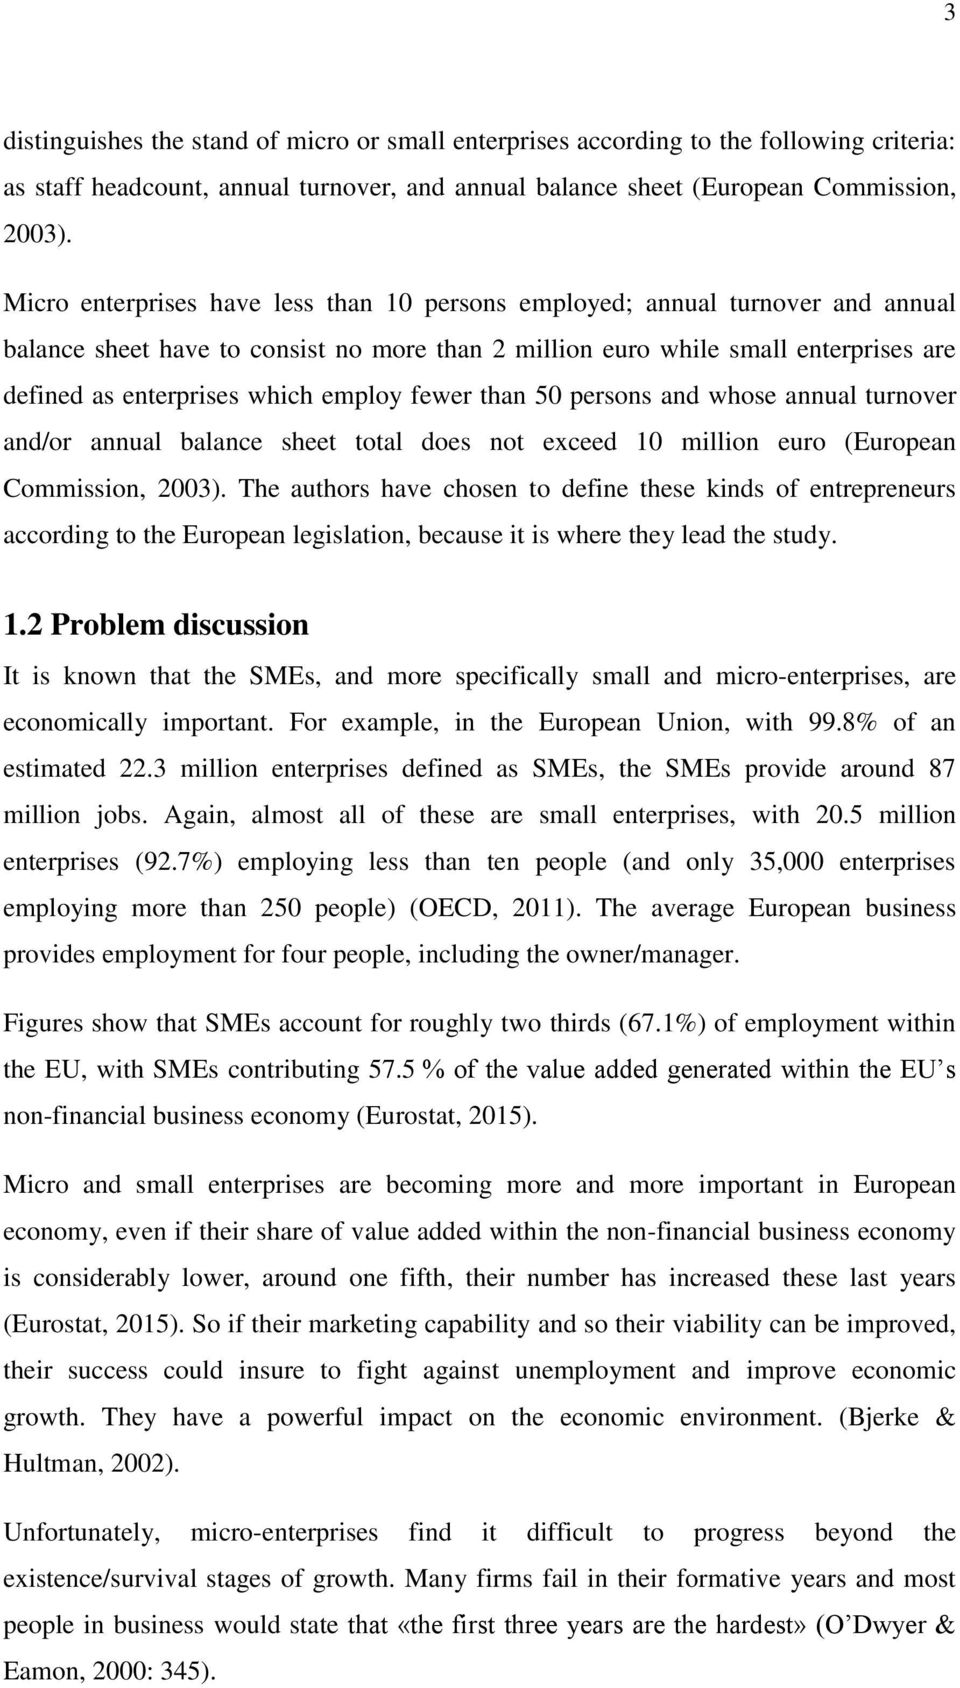 employ fewer than 50 persons and whose annual turnover and/or annual balance sheet total does not exceed 10 million euro (European Commission, 2003).